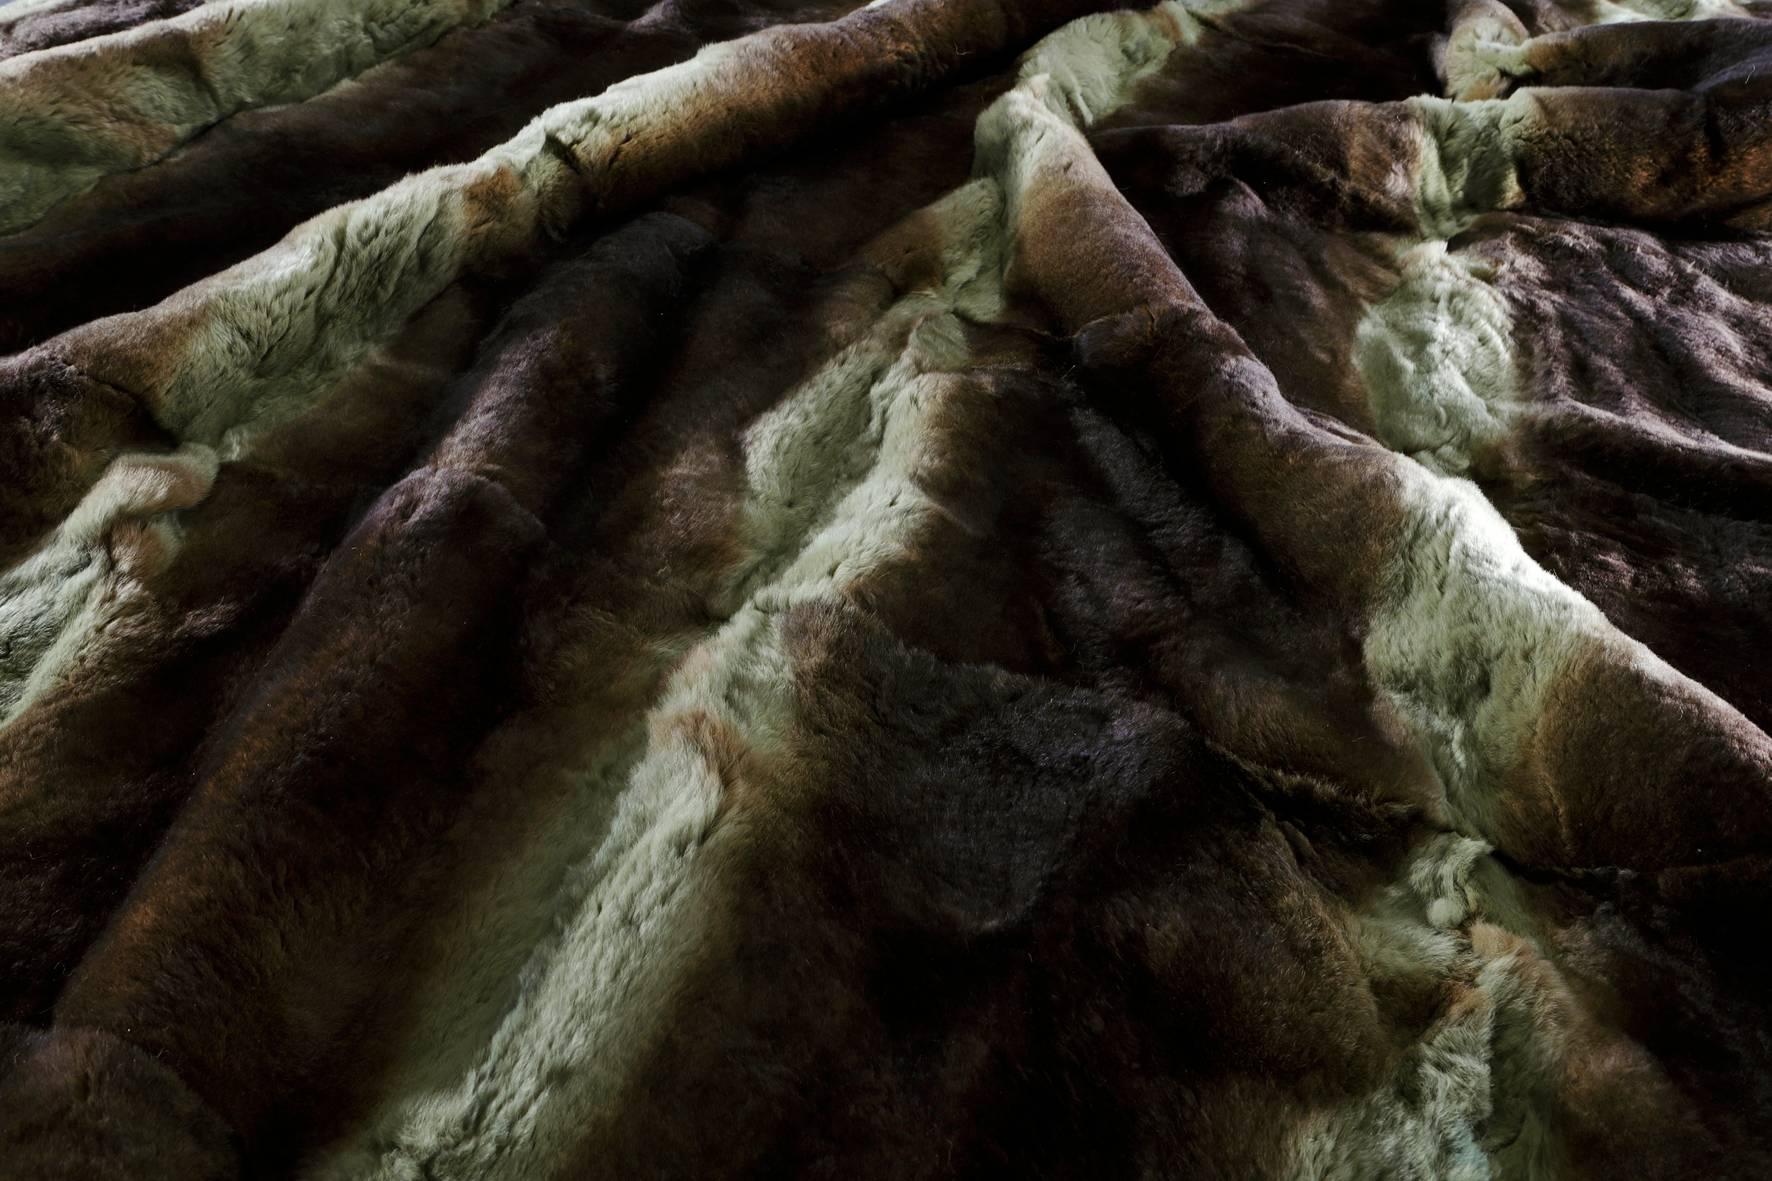 ORYLAG, RARE AND PRECIOUS FUR
Luxurious, warm and soft Orylag french fur throw - dyed in pistachio color.
Fully lined with Italian cashmere.
Work of excellence, French Orylag fur is a rare and precious material.
